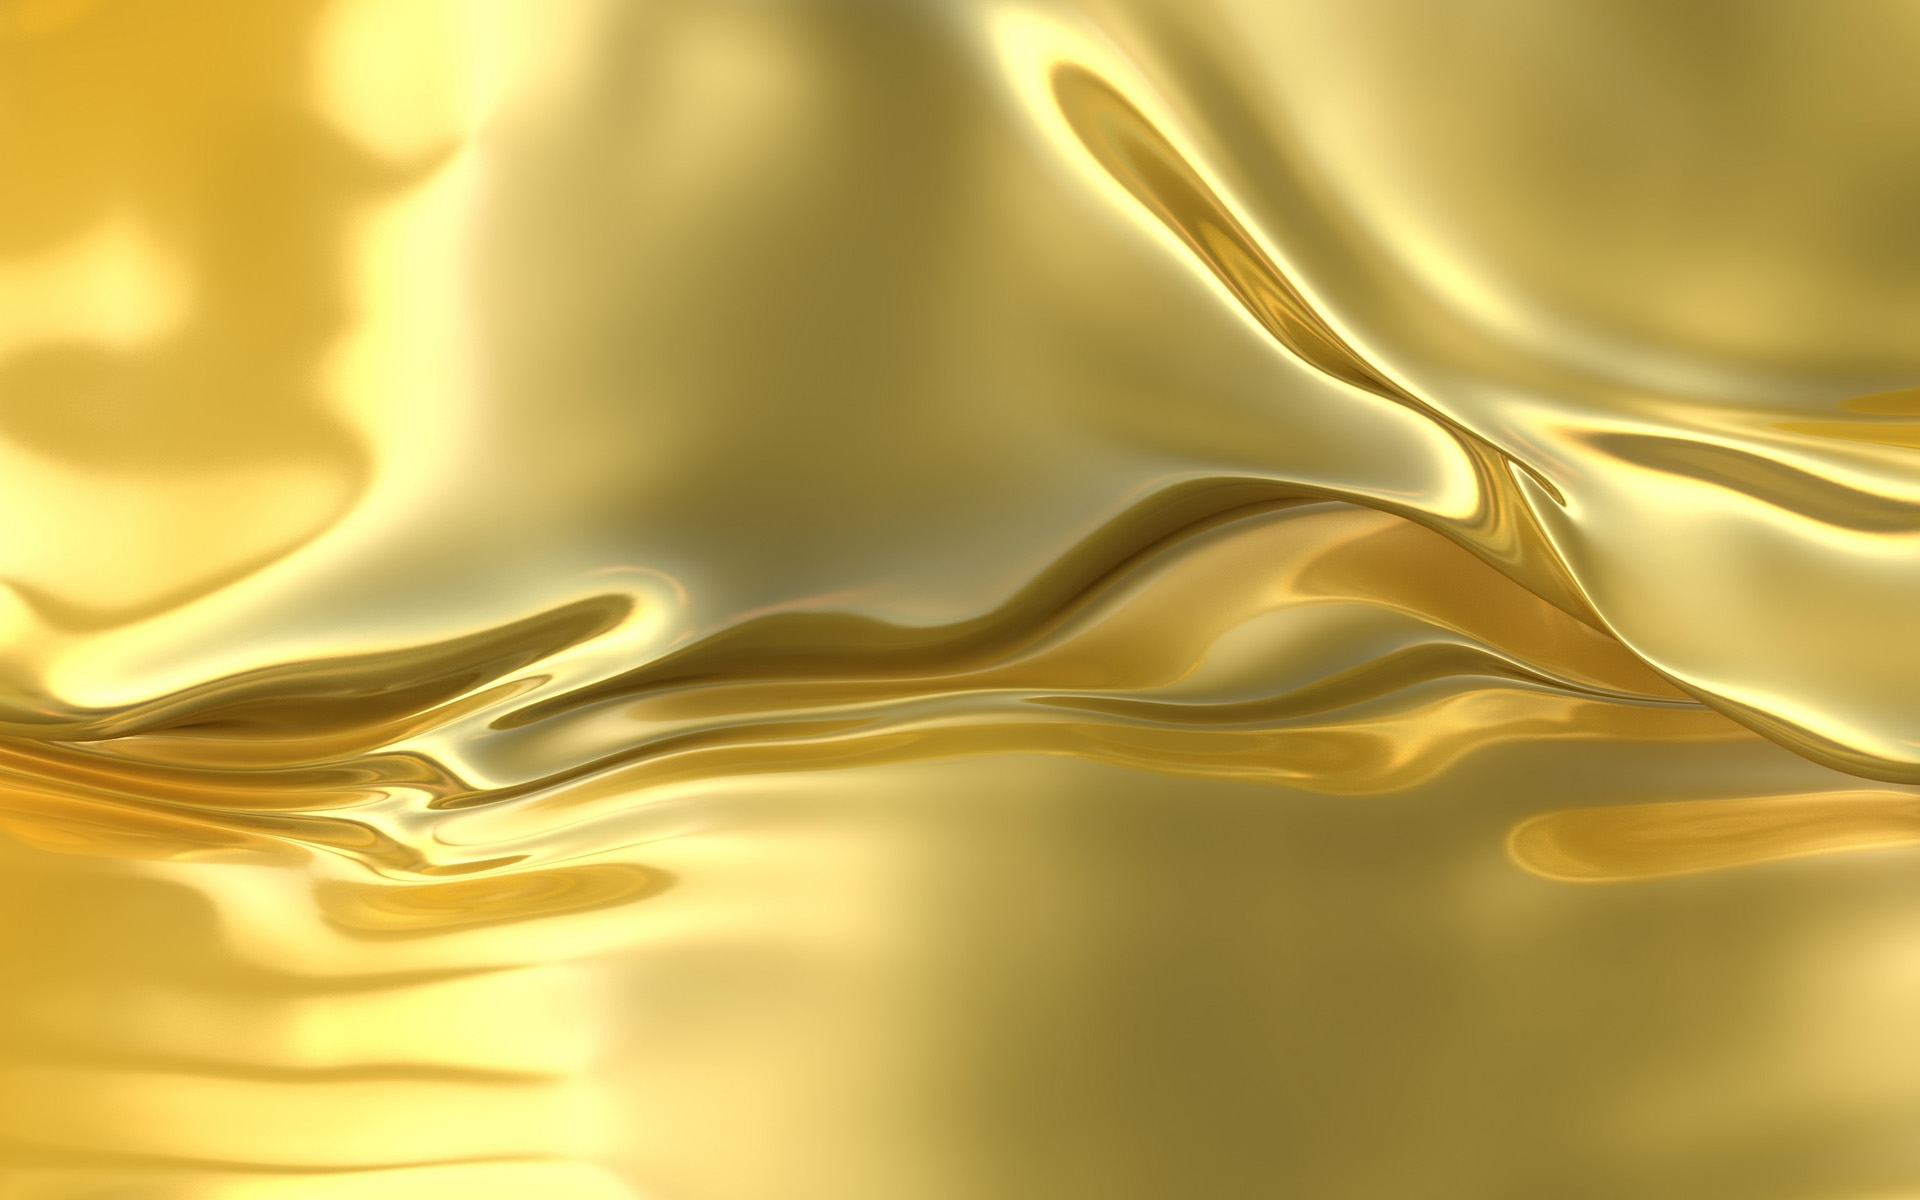 HD Wallpaper Golden Ouro Abstract Gold Texture